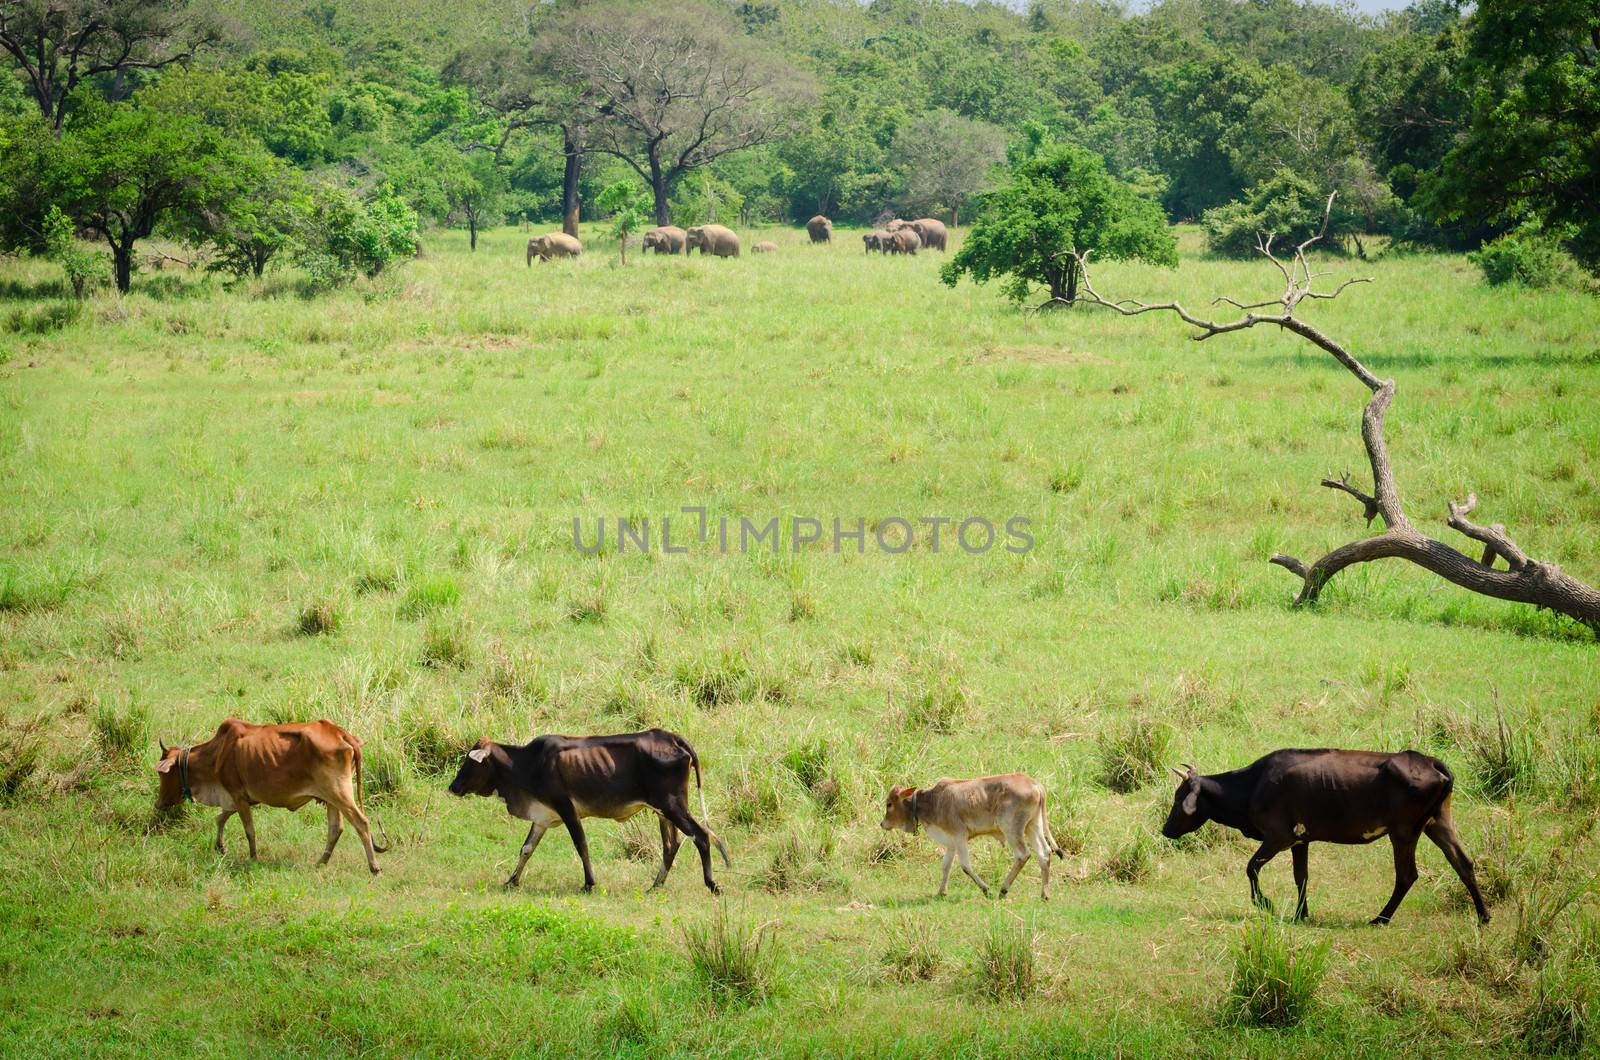 Domestic animals with wild elephants on background in green fields